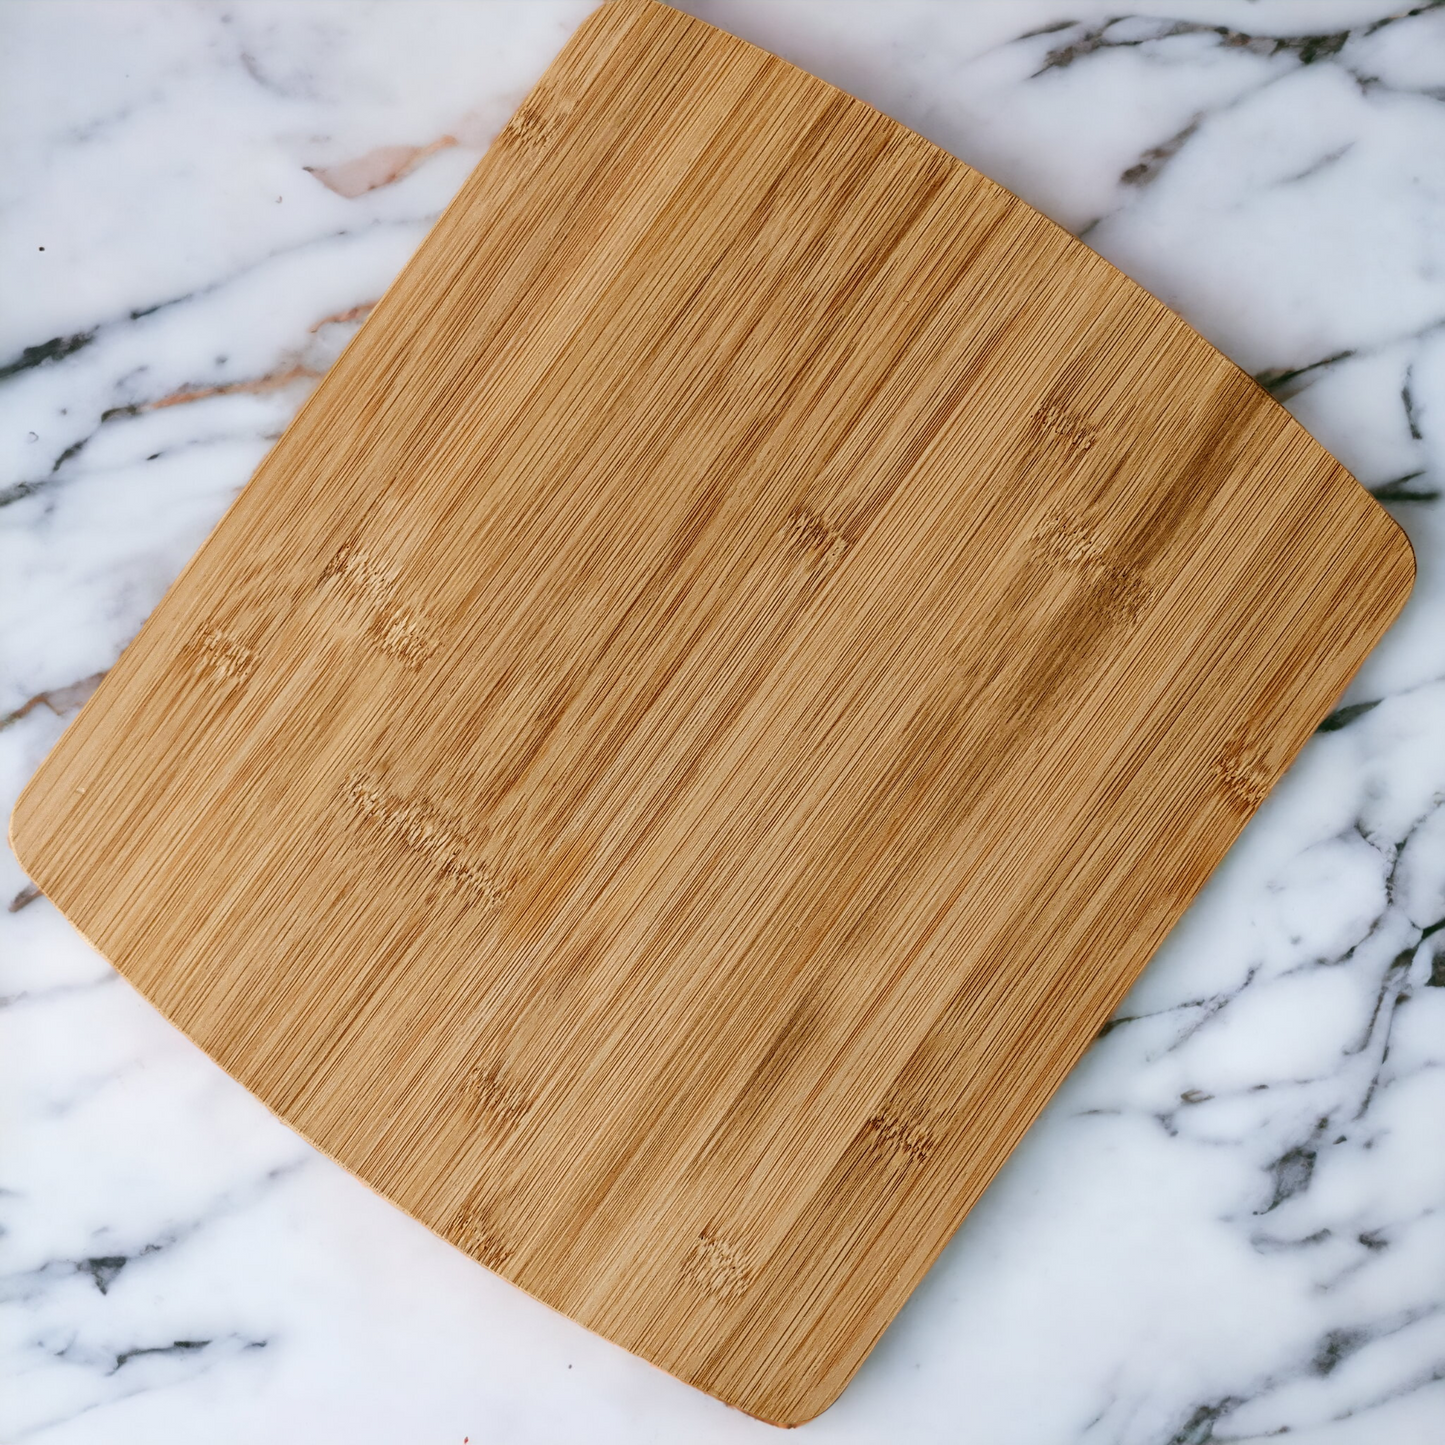 A Mother's Love full-color pine/bamboo cutting board